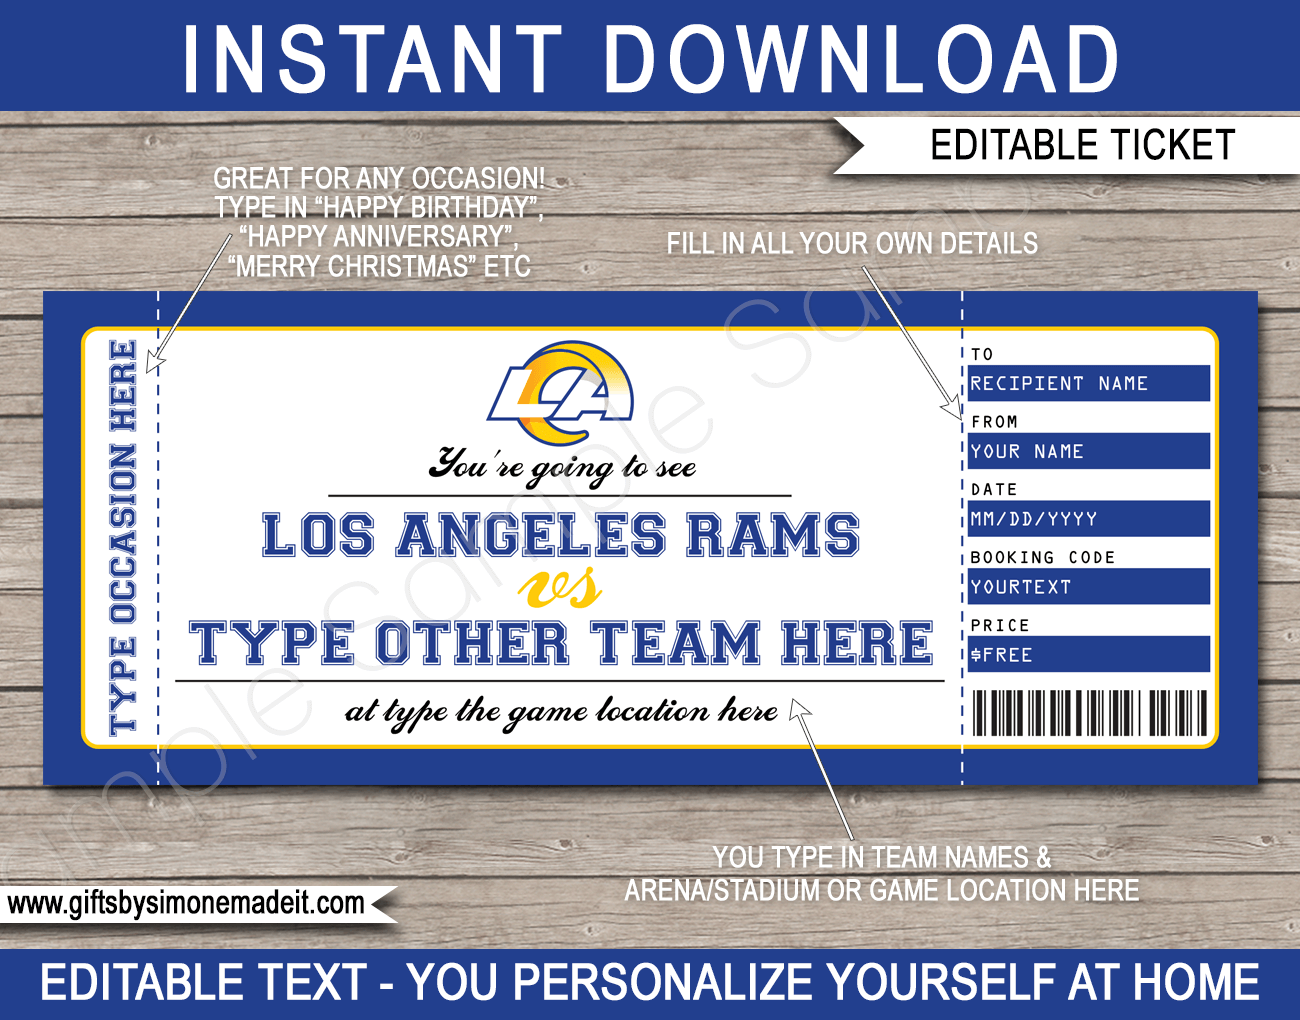 Los Angeles Rams Game Ticket Gift Voucher